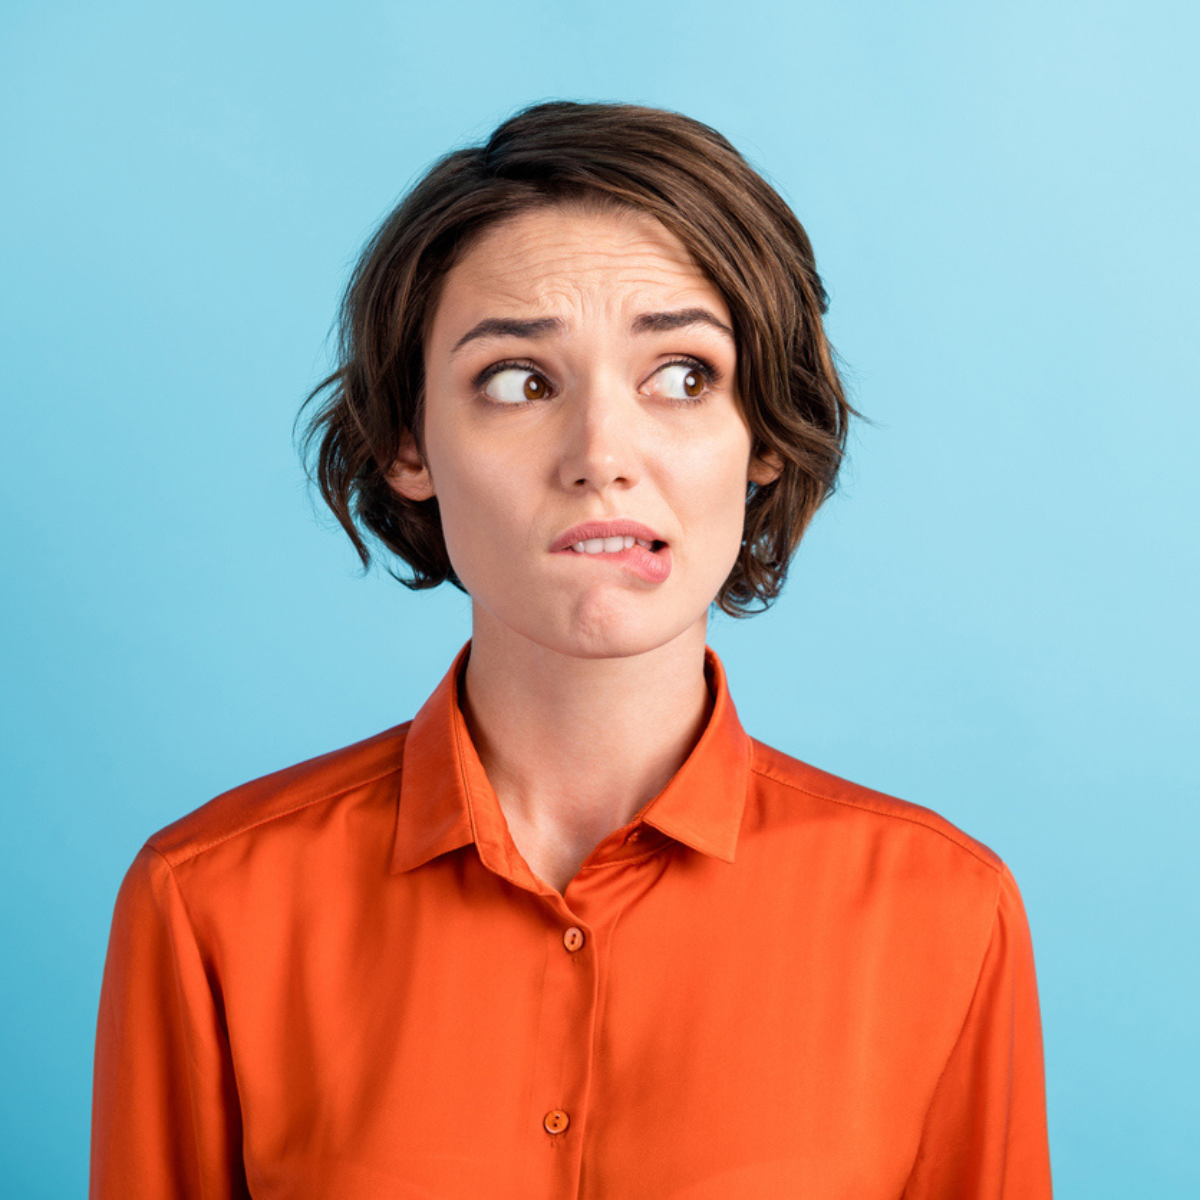 A woman with short brown hair in an orange shirt biting her lip becuase she's worried about a fishy vaginal odor.